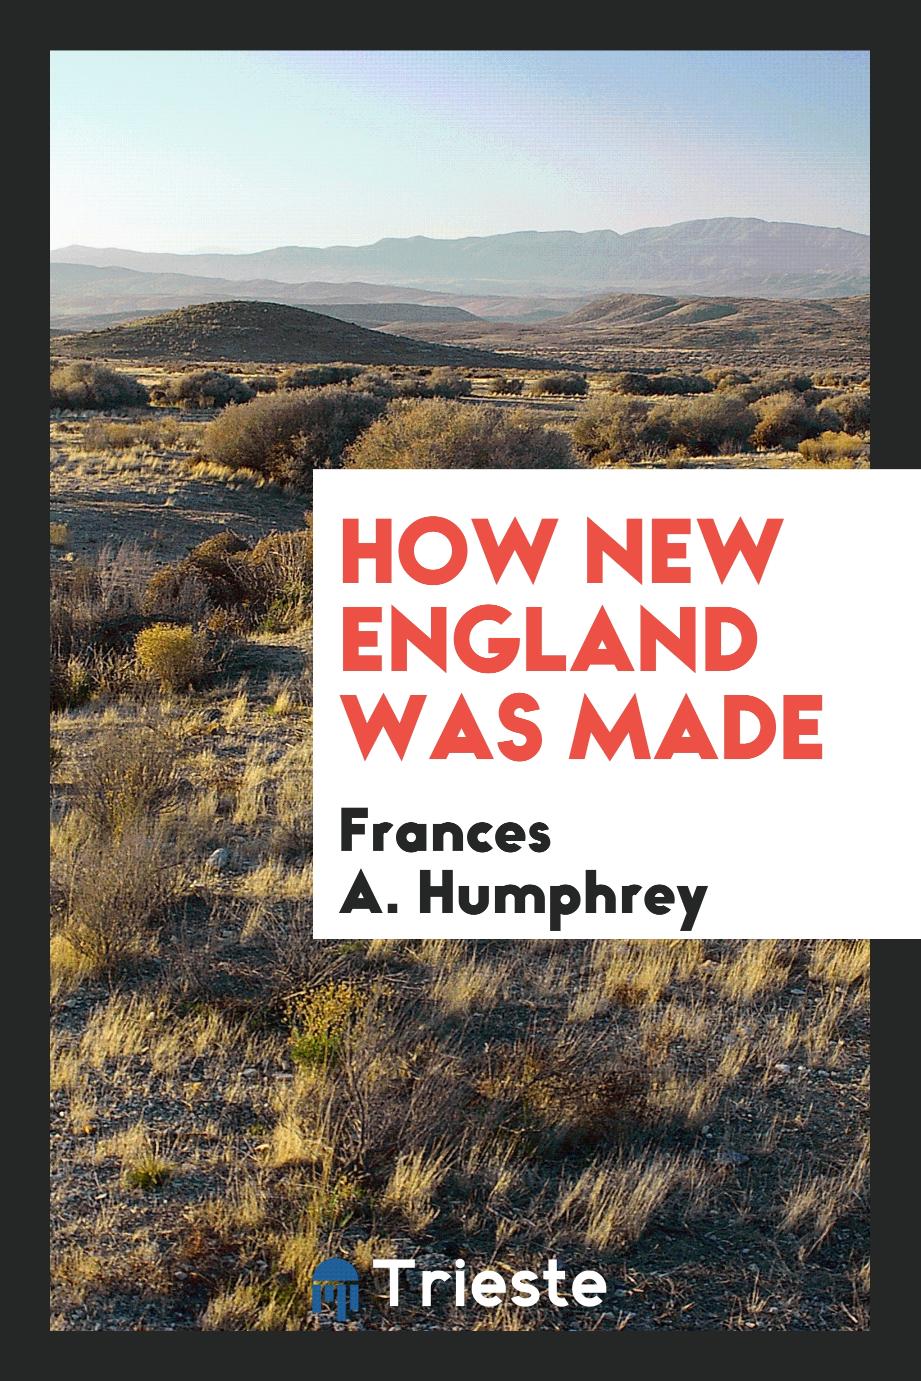 How New England was made